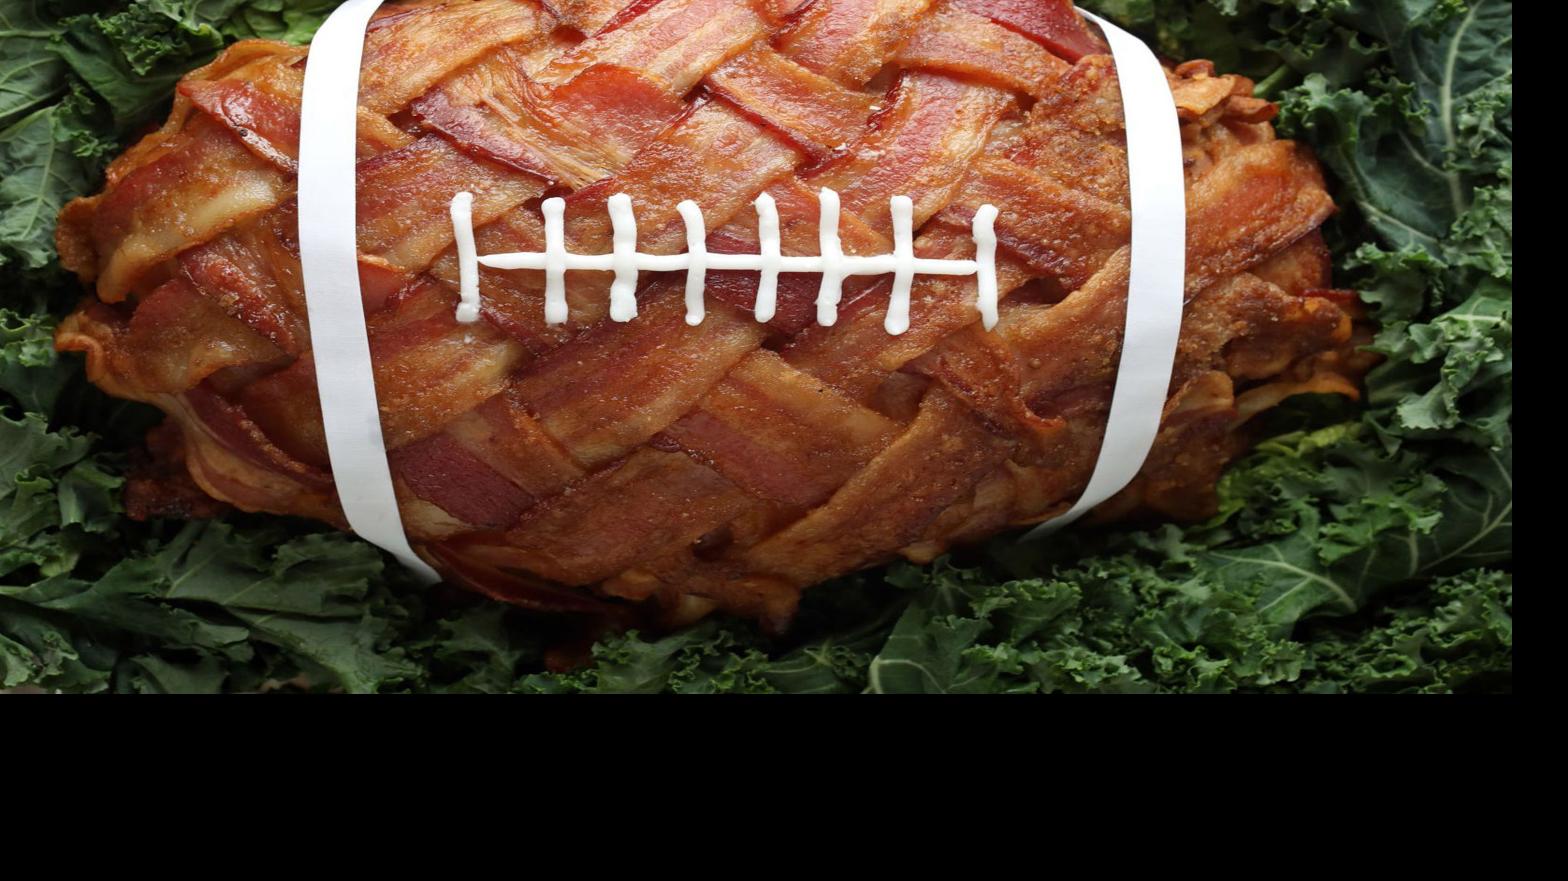 Super Bowl Super Bacon Food And Cooking Stltoday Com - bacon songbacon song robloxrub some bacon on it